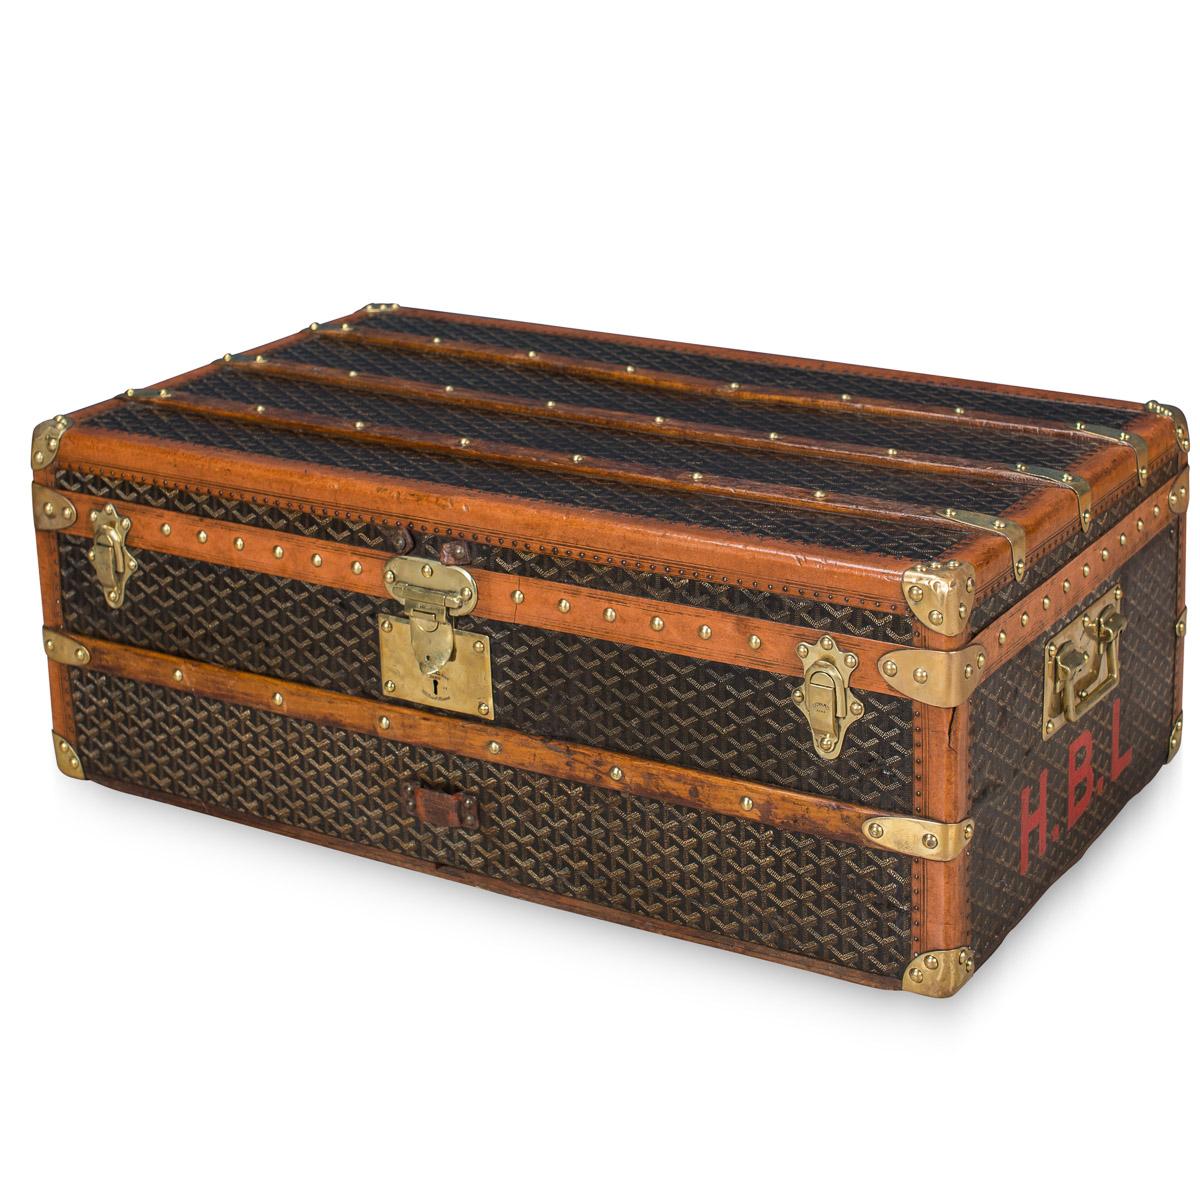 A wonderful Goyard cabin trunk dating to the early part of the 20th century, circa 1900-1910. Over recent years the brand has been relaunched and has taken the world of fashion by storm. The original E. Goyard firm was a trunk maker which rivalled